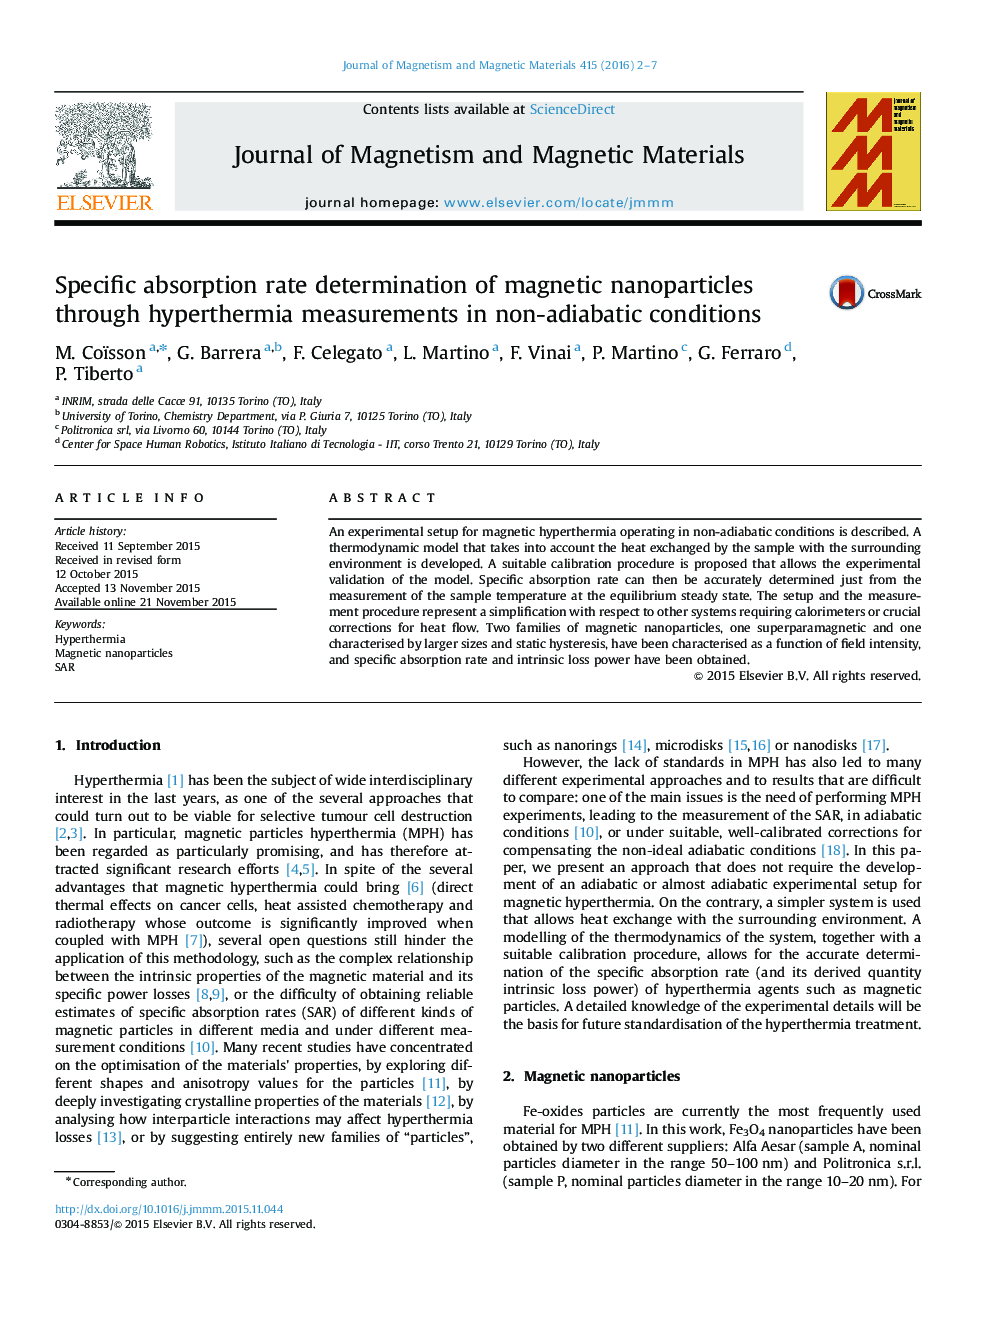 Specific absorption rate determination of magnetic nanoparticles through hyperthermia measurements in non-adiabatic conditions